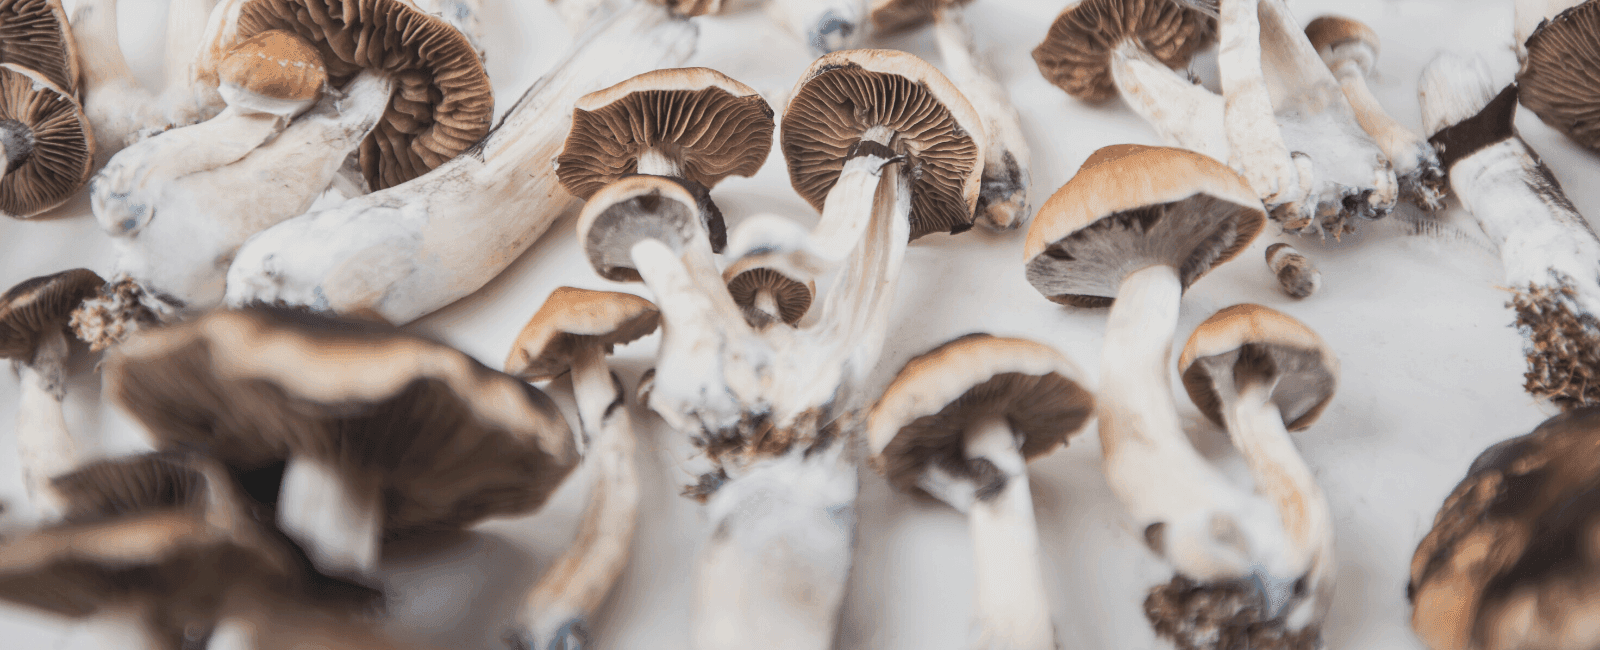 Washington State Bill for Psilocybin Services Overhauled for Further Study